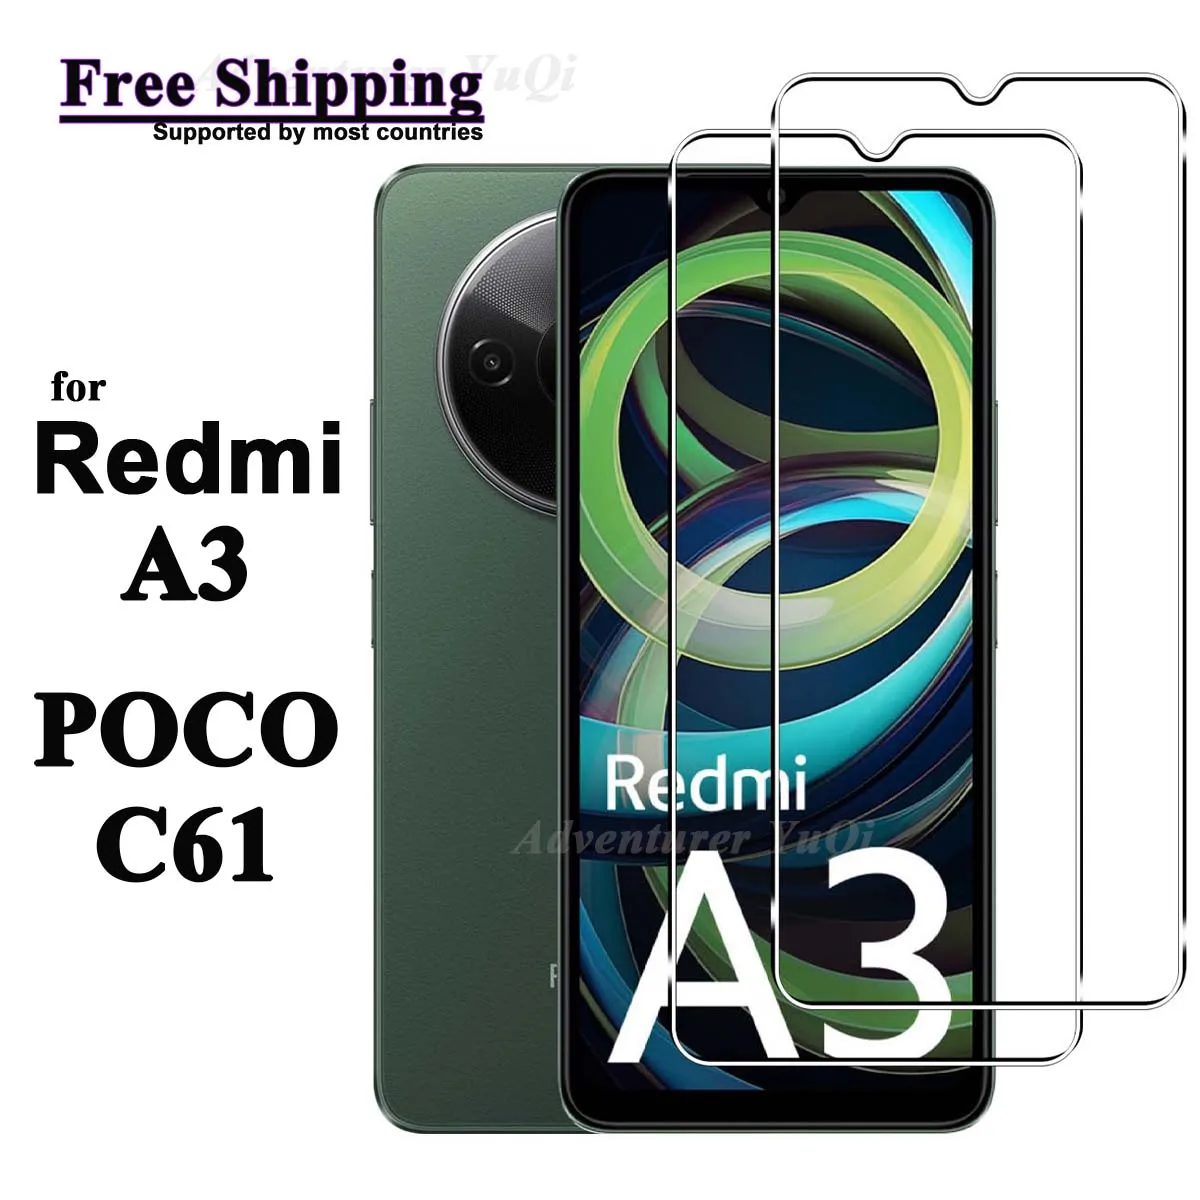 

Screen Protector For Redmi A3 POCO C61 Xiaomi, Tempered Glass HD 9H Hight Aluminum Transparent Case Friendly Free Shipping